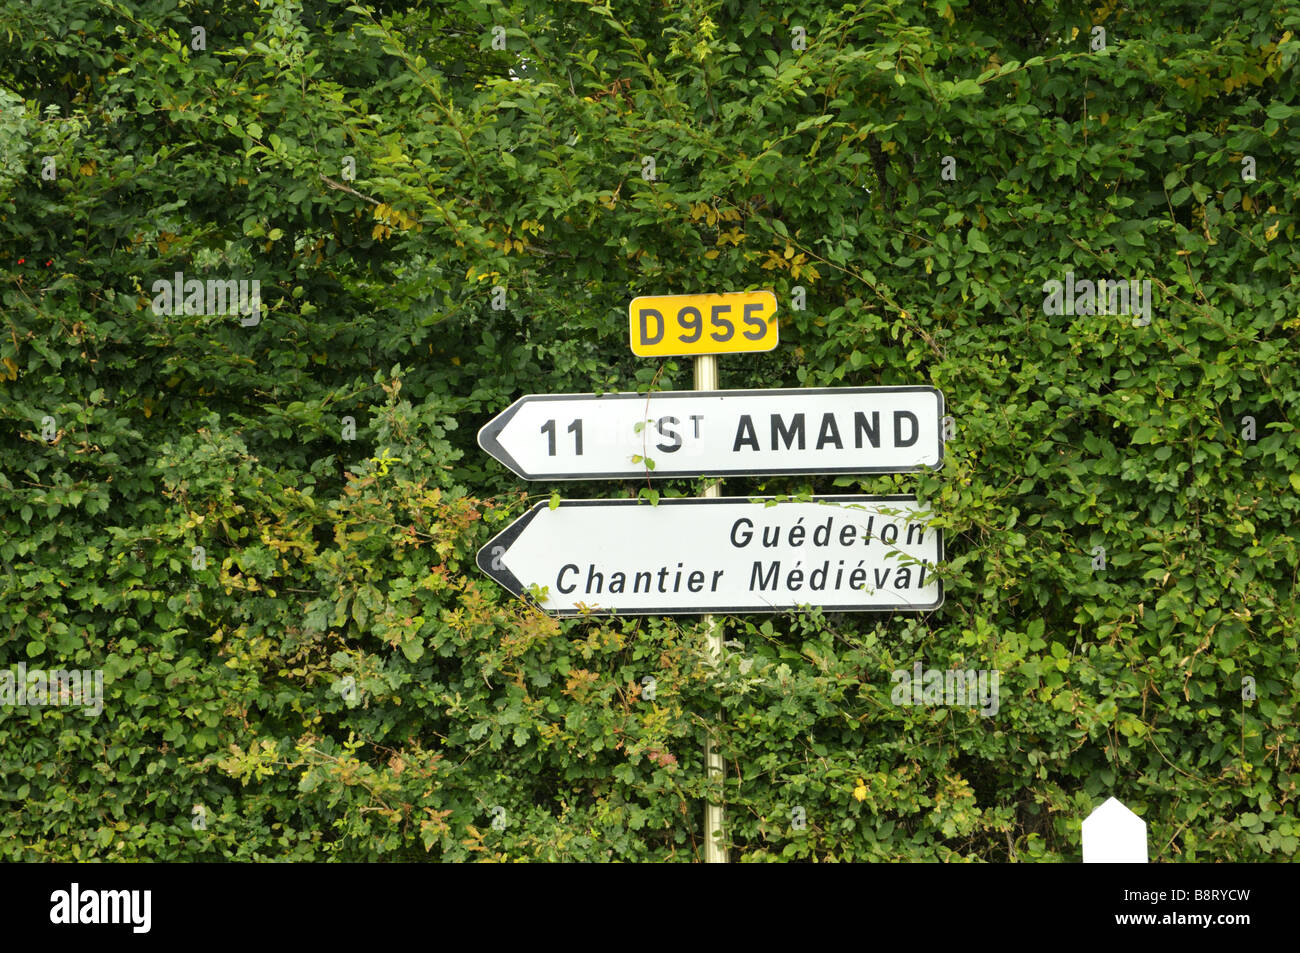 Direction to Guedelon medieval building site near St Amand Burgundy France Stock Photo